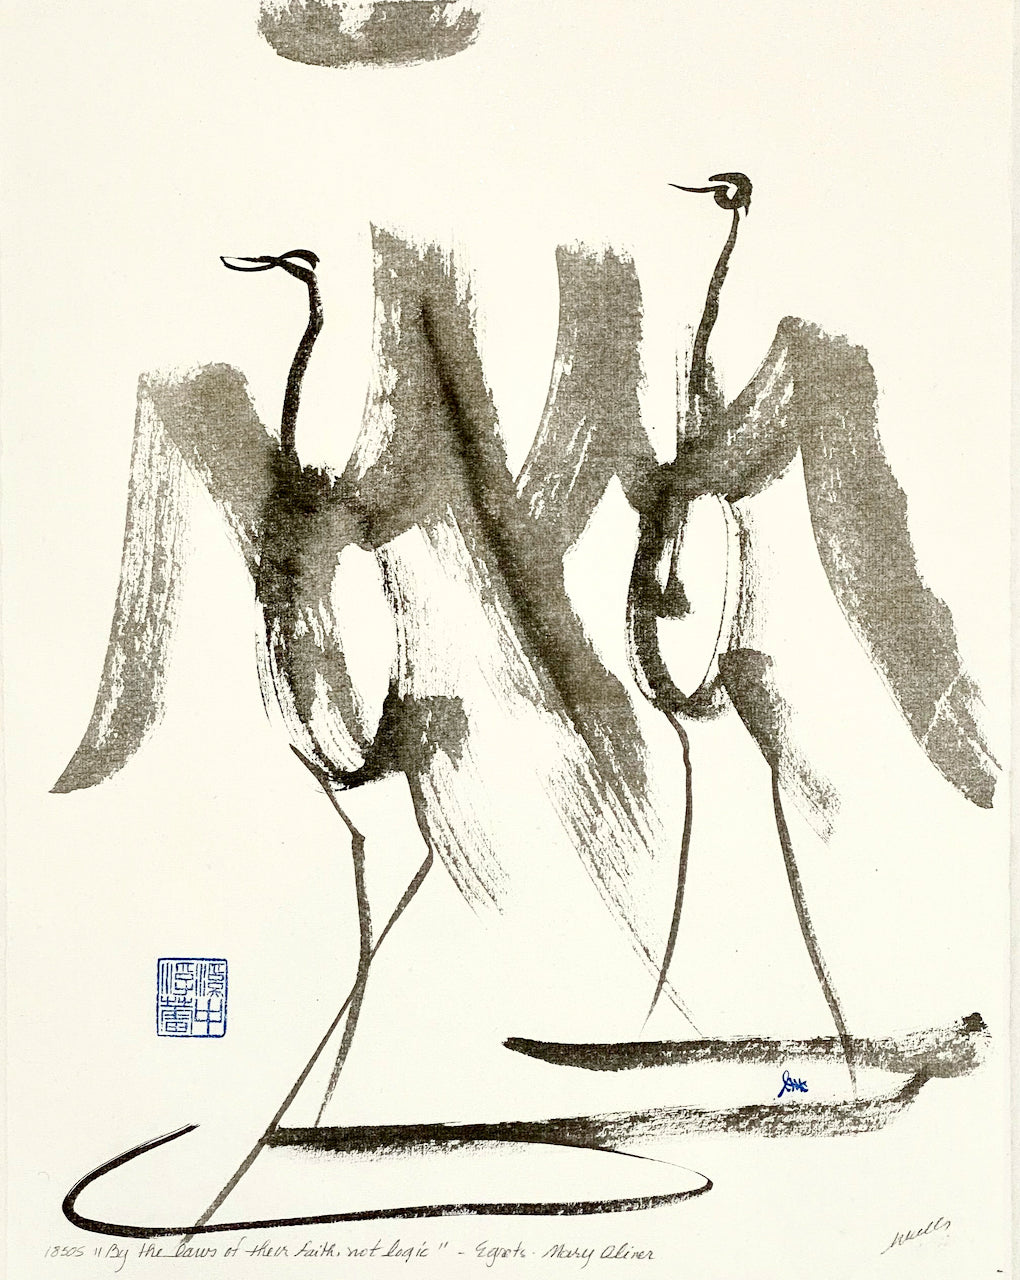 Abstract sumi e Original“By the Laws of Man” by Marilyn Wells